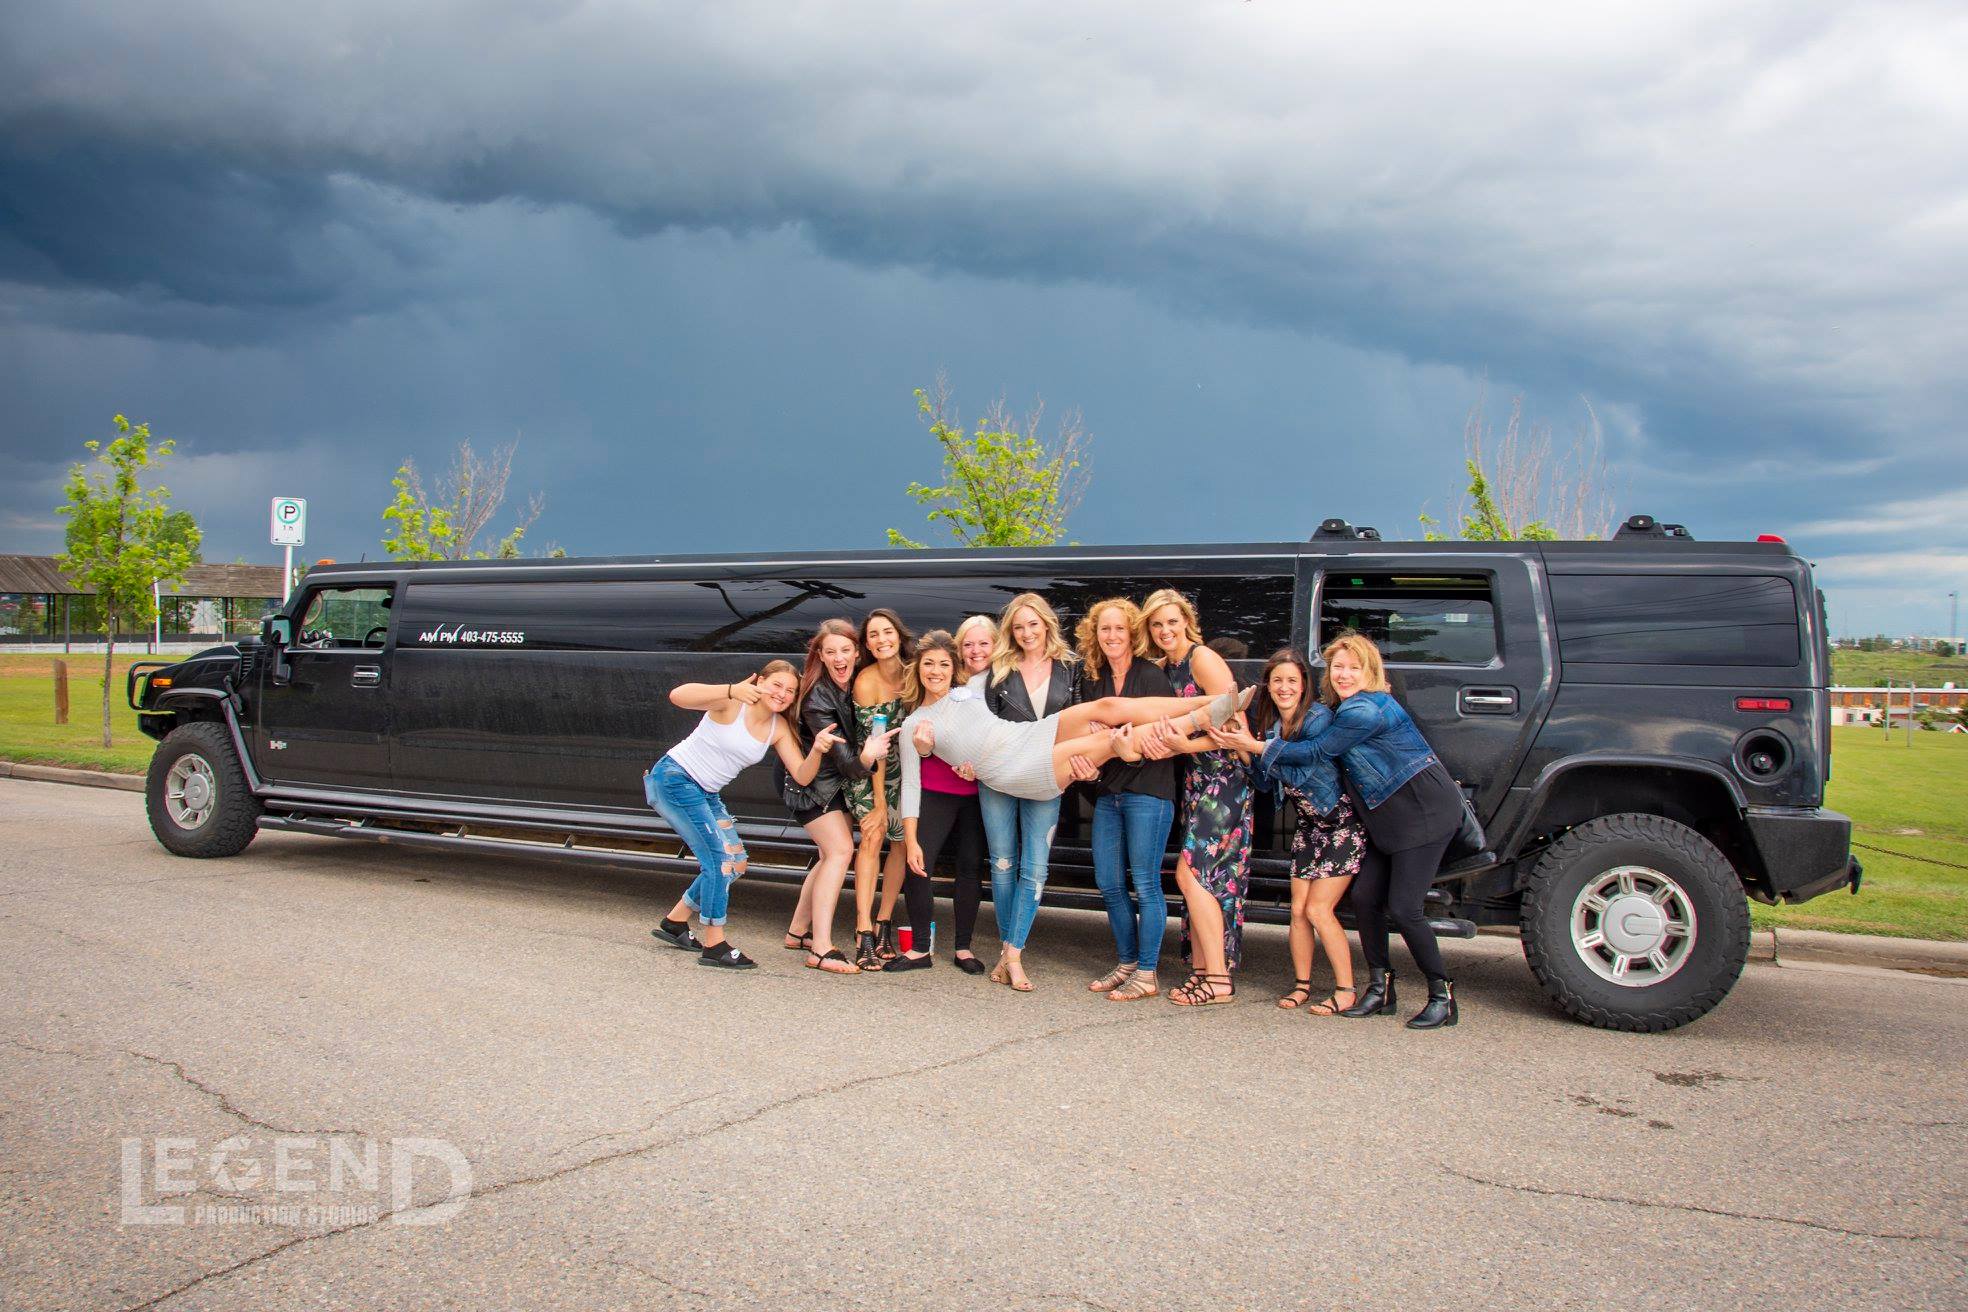 The Best Calgary Limo Service. Party Bus Rental Company